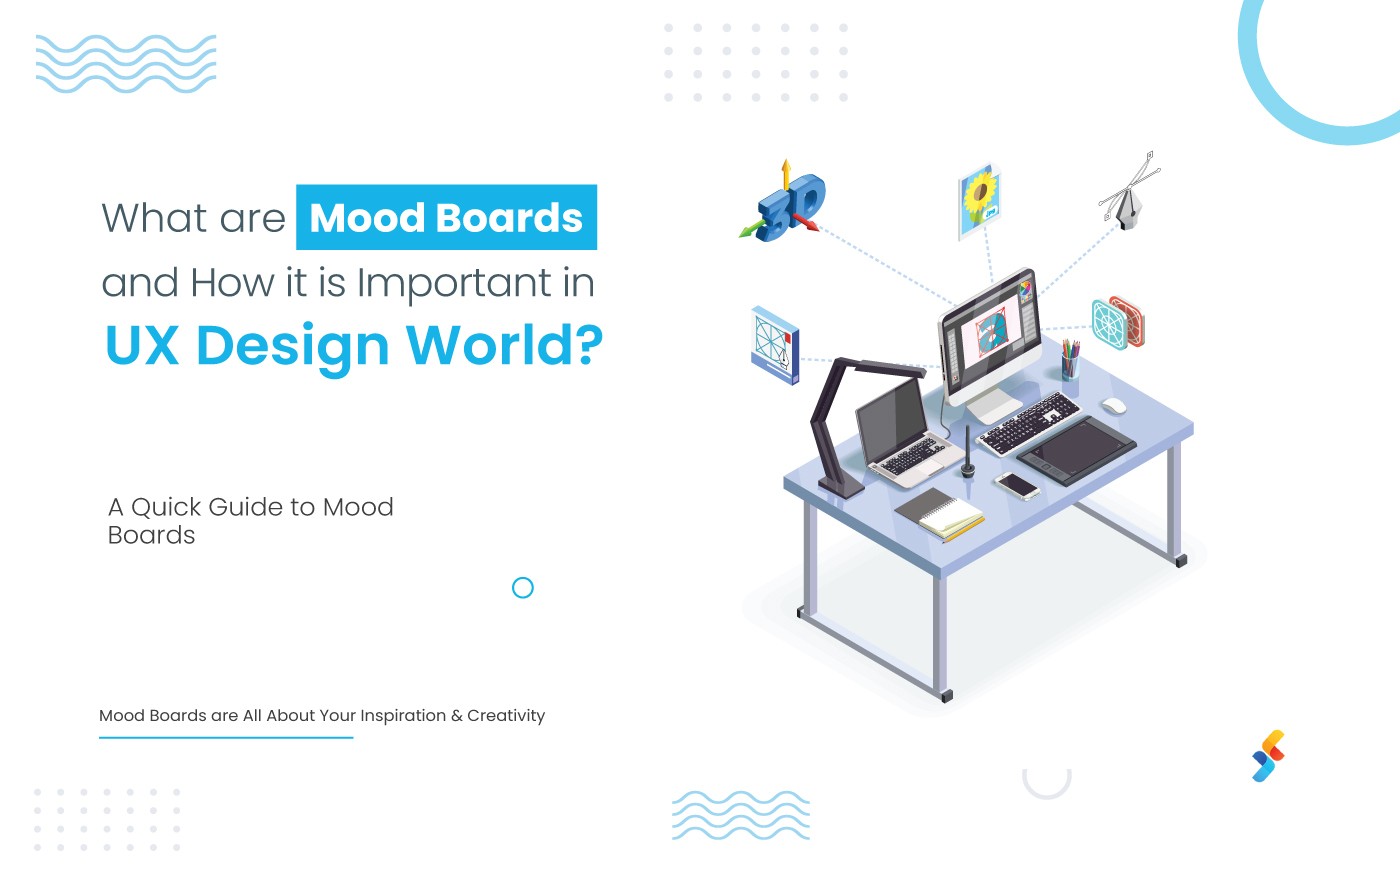 What are Mood Boards and How it is Important in UX Design World?